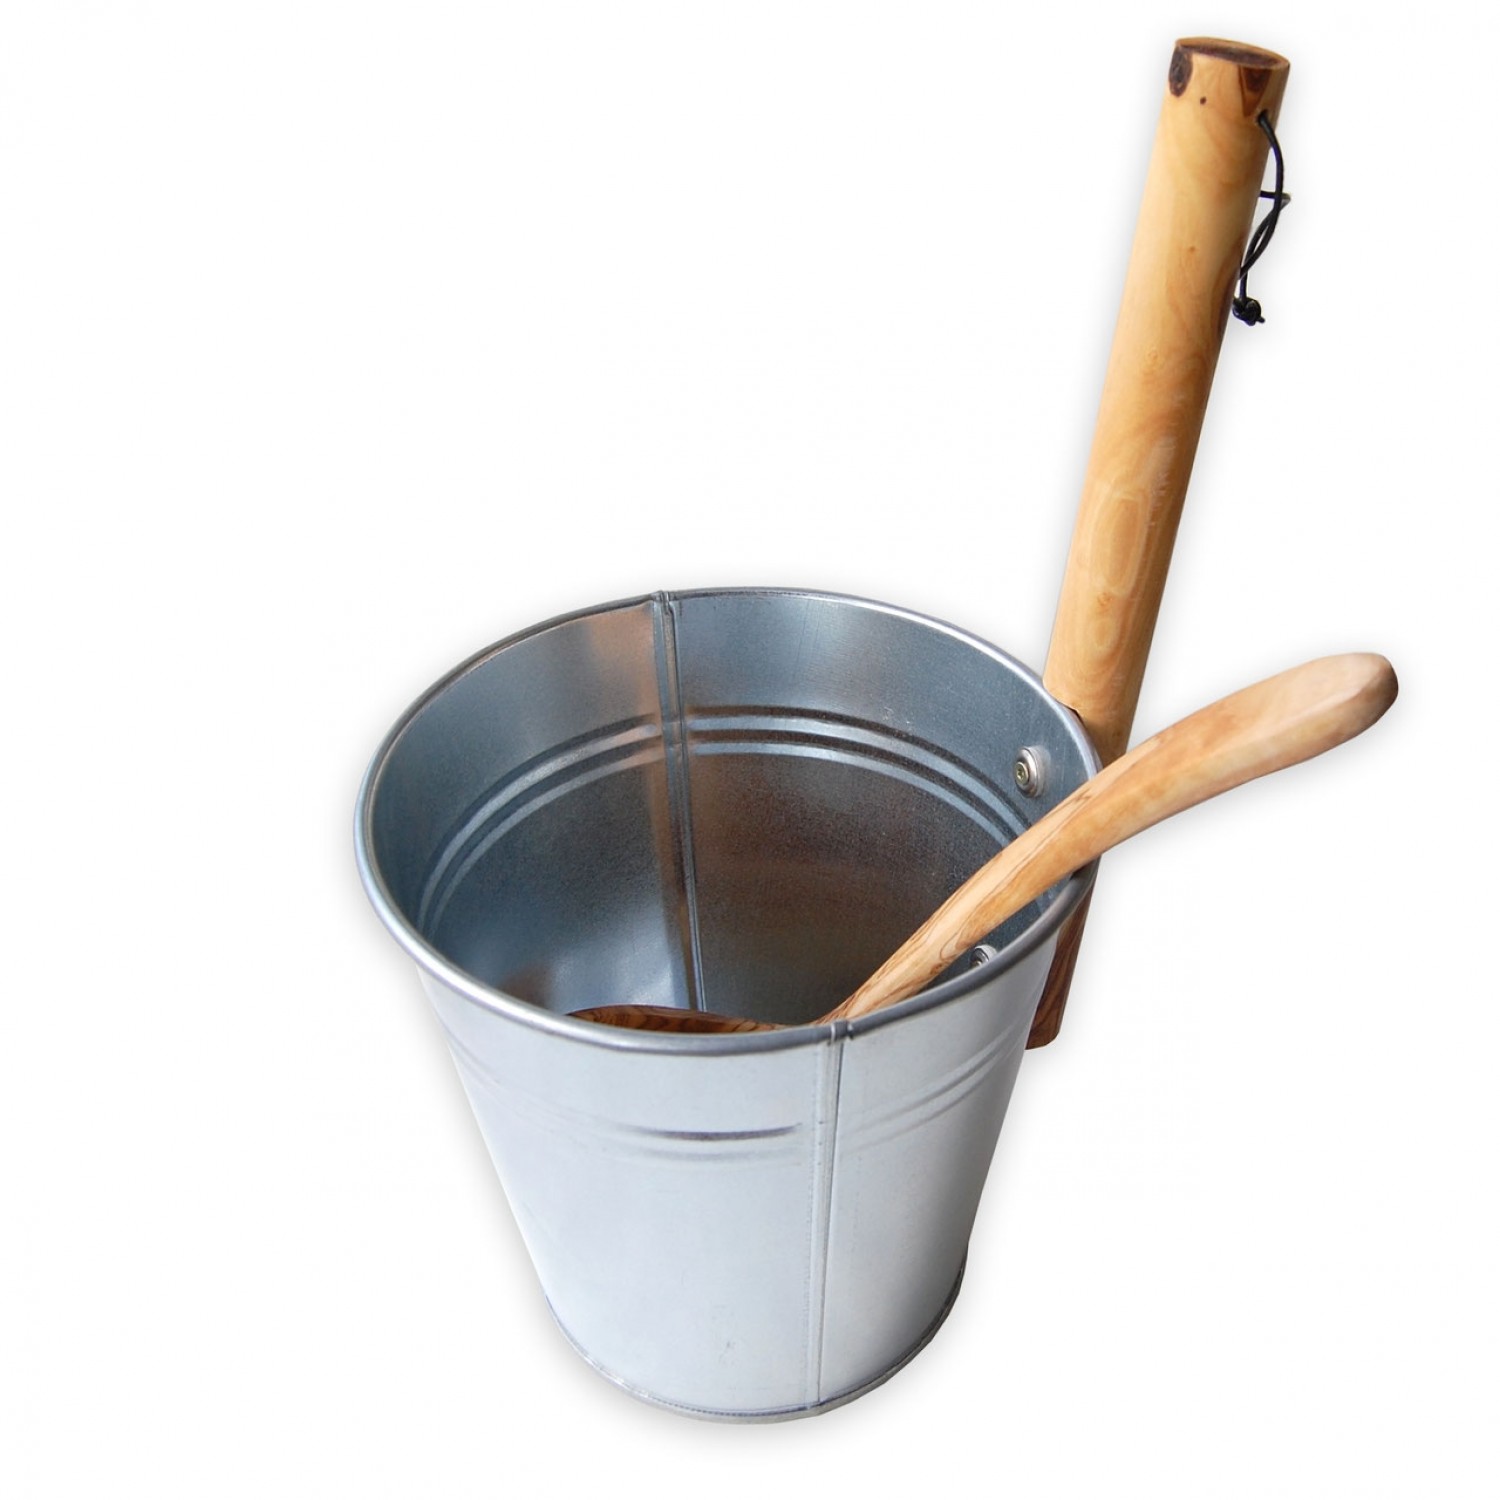 Sauna Accessory: Metal Bucket 3 L without Olive Wood Ladle | D.O.M. 